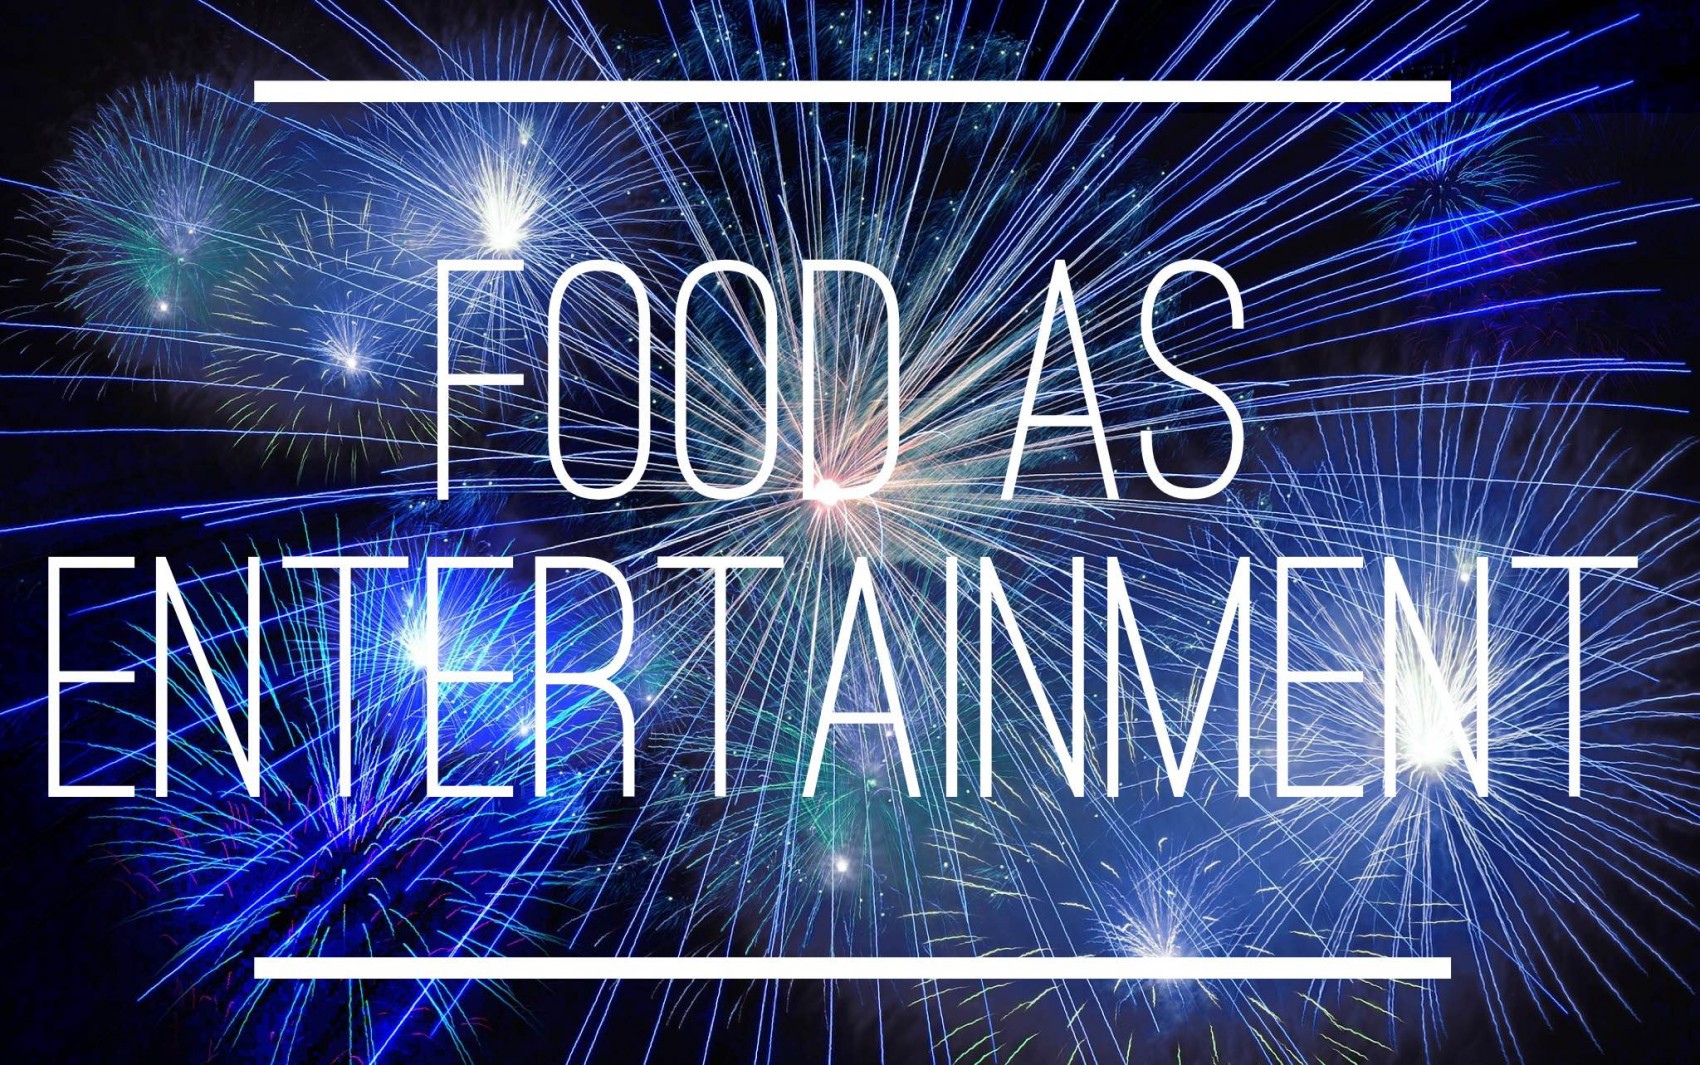 Food as Entertainment